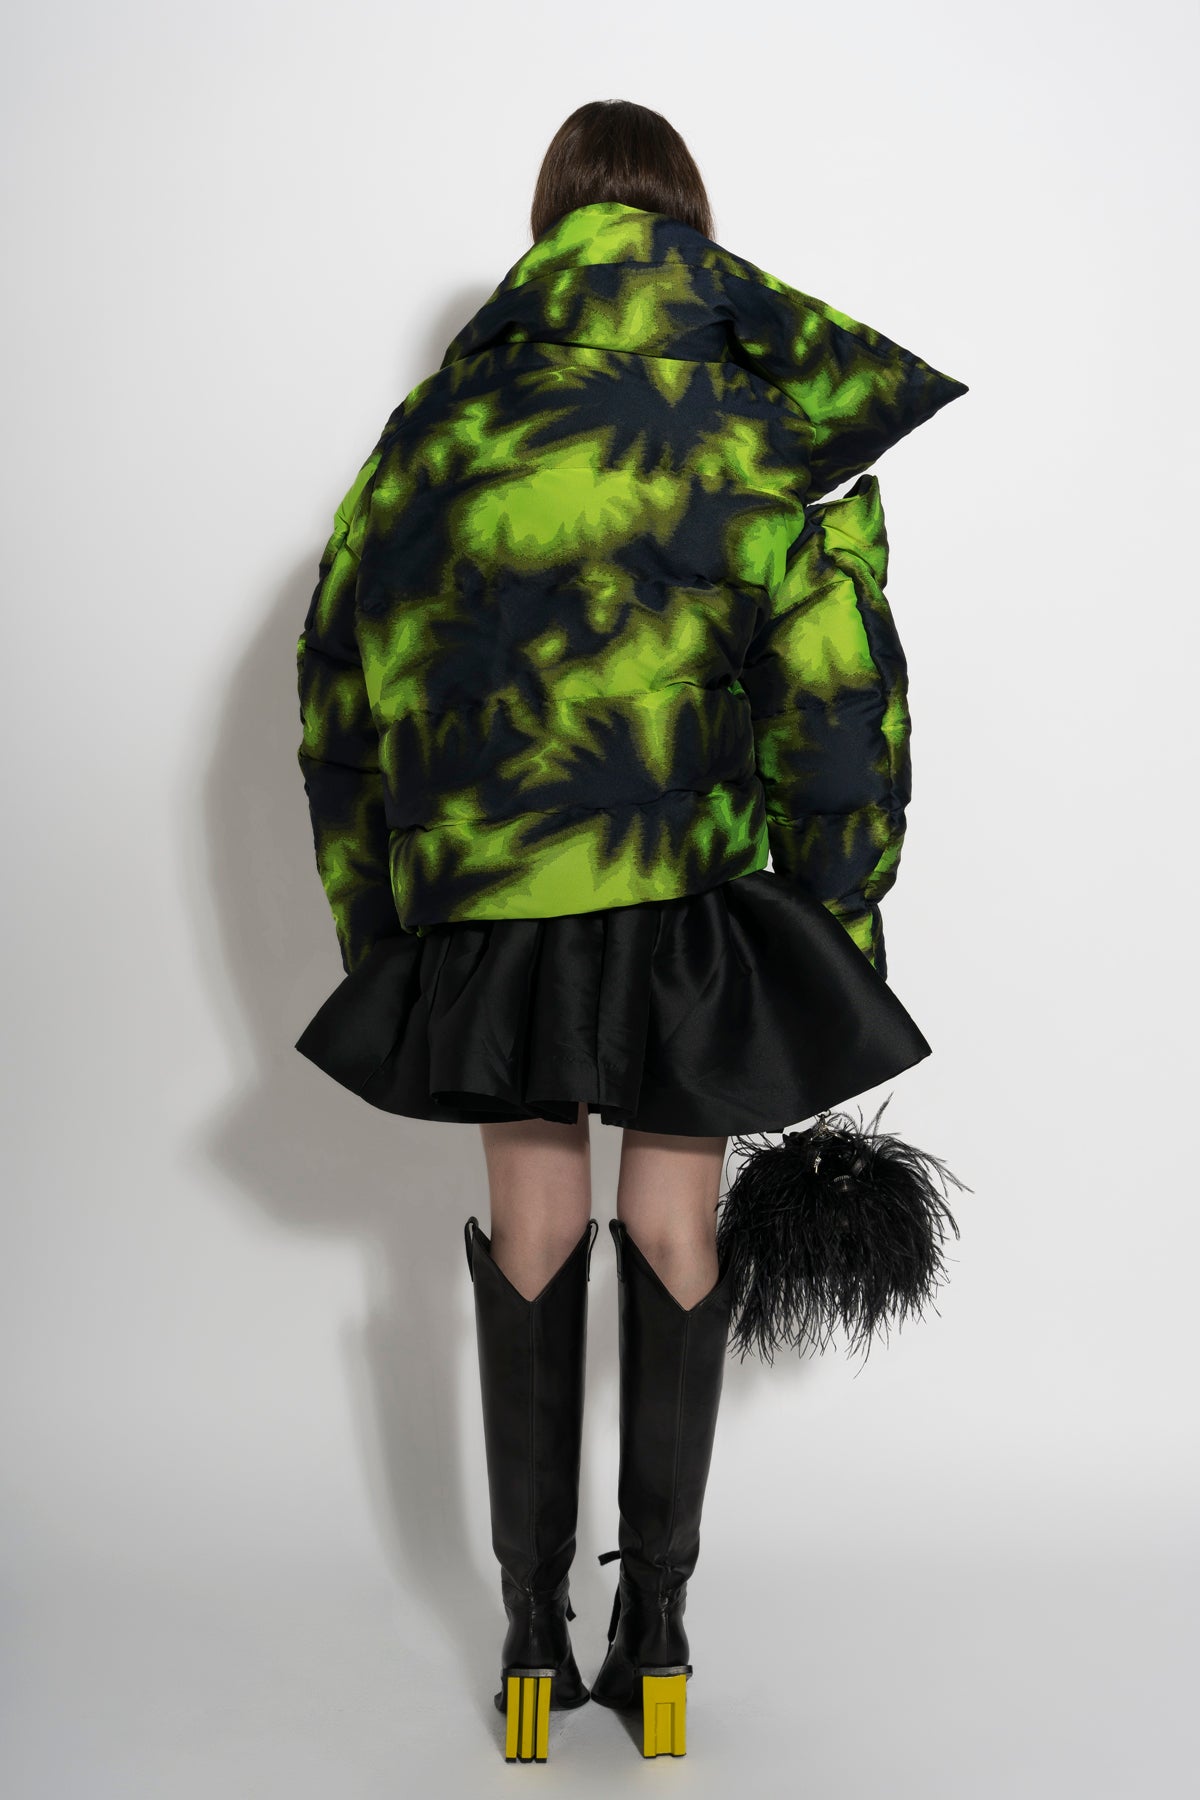 CLASSIC M'A PUFFA JACKET IN LIME TIE DYE